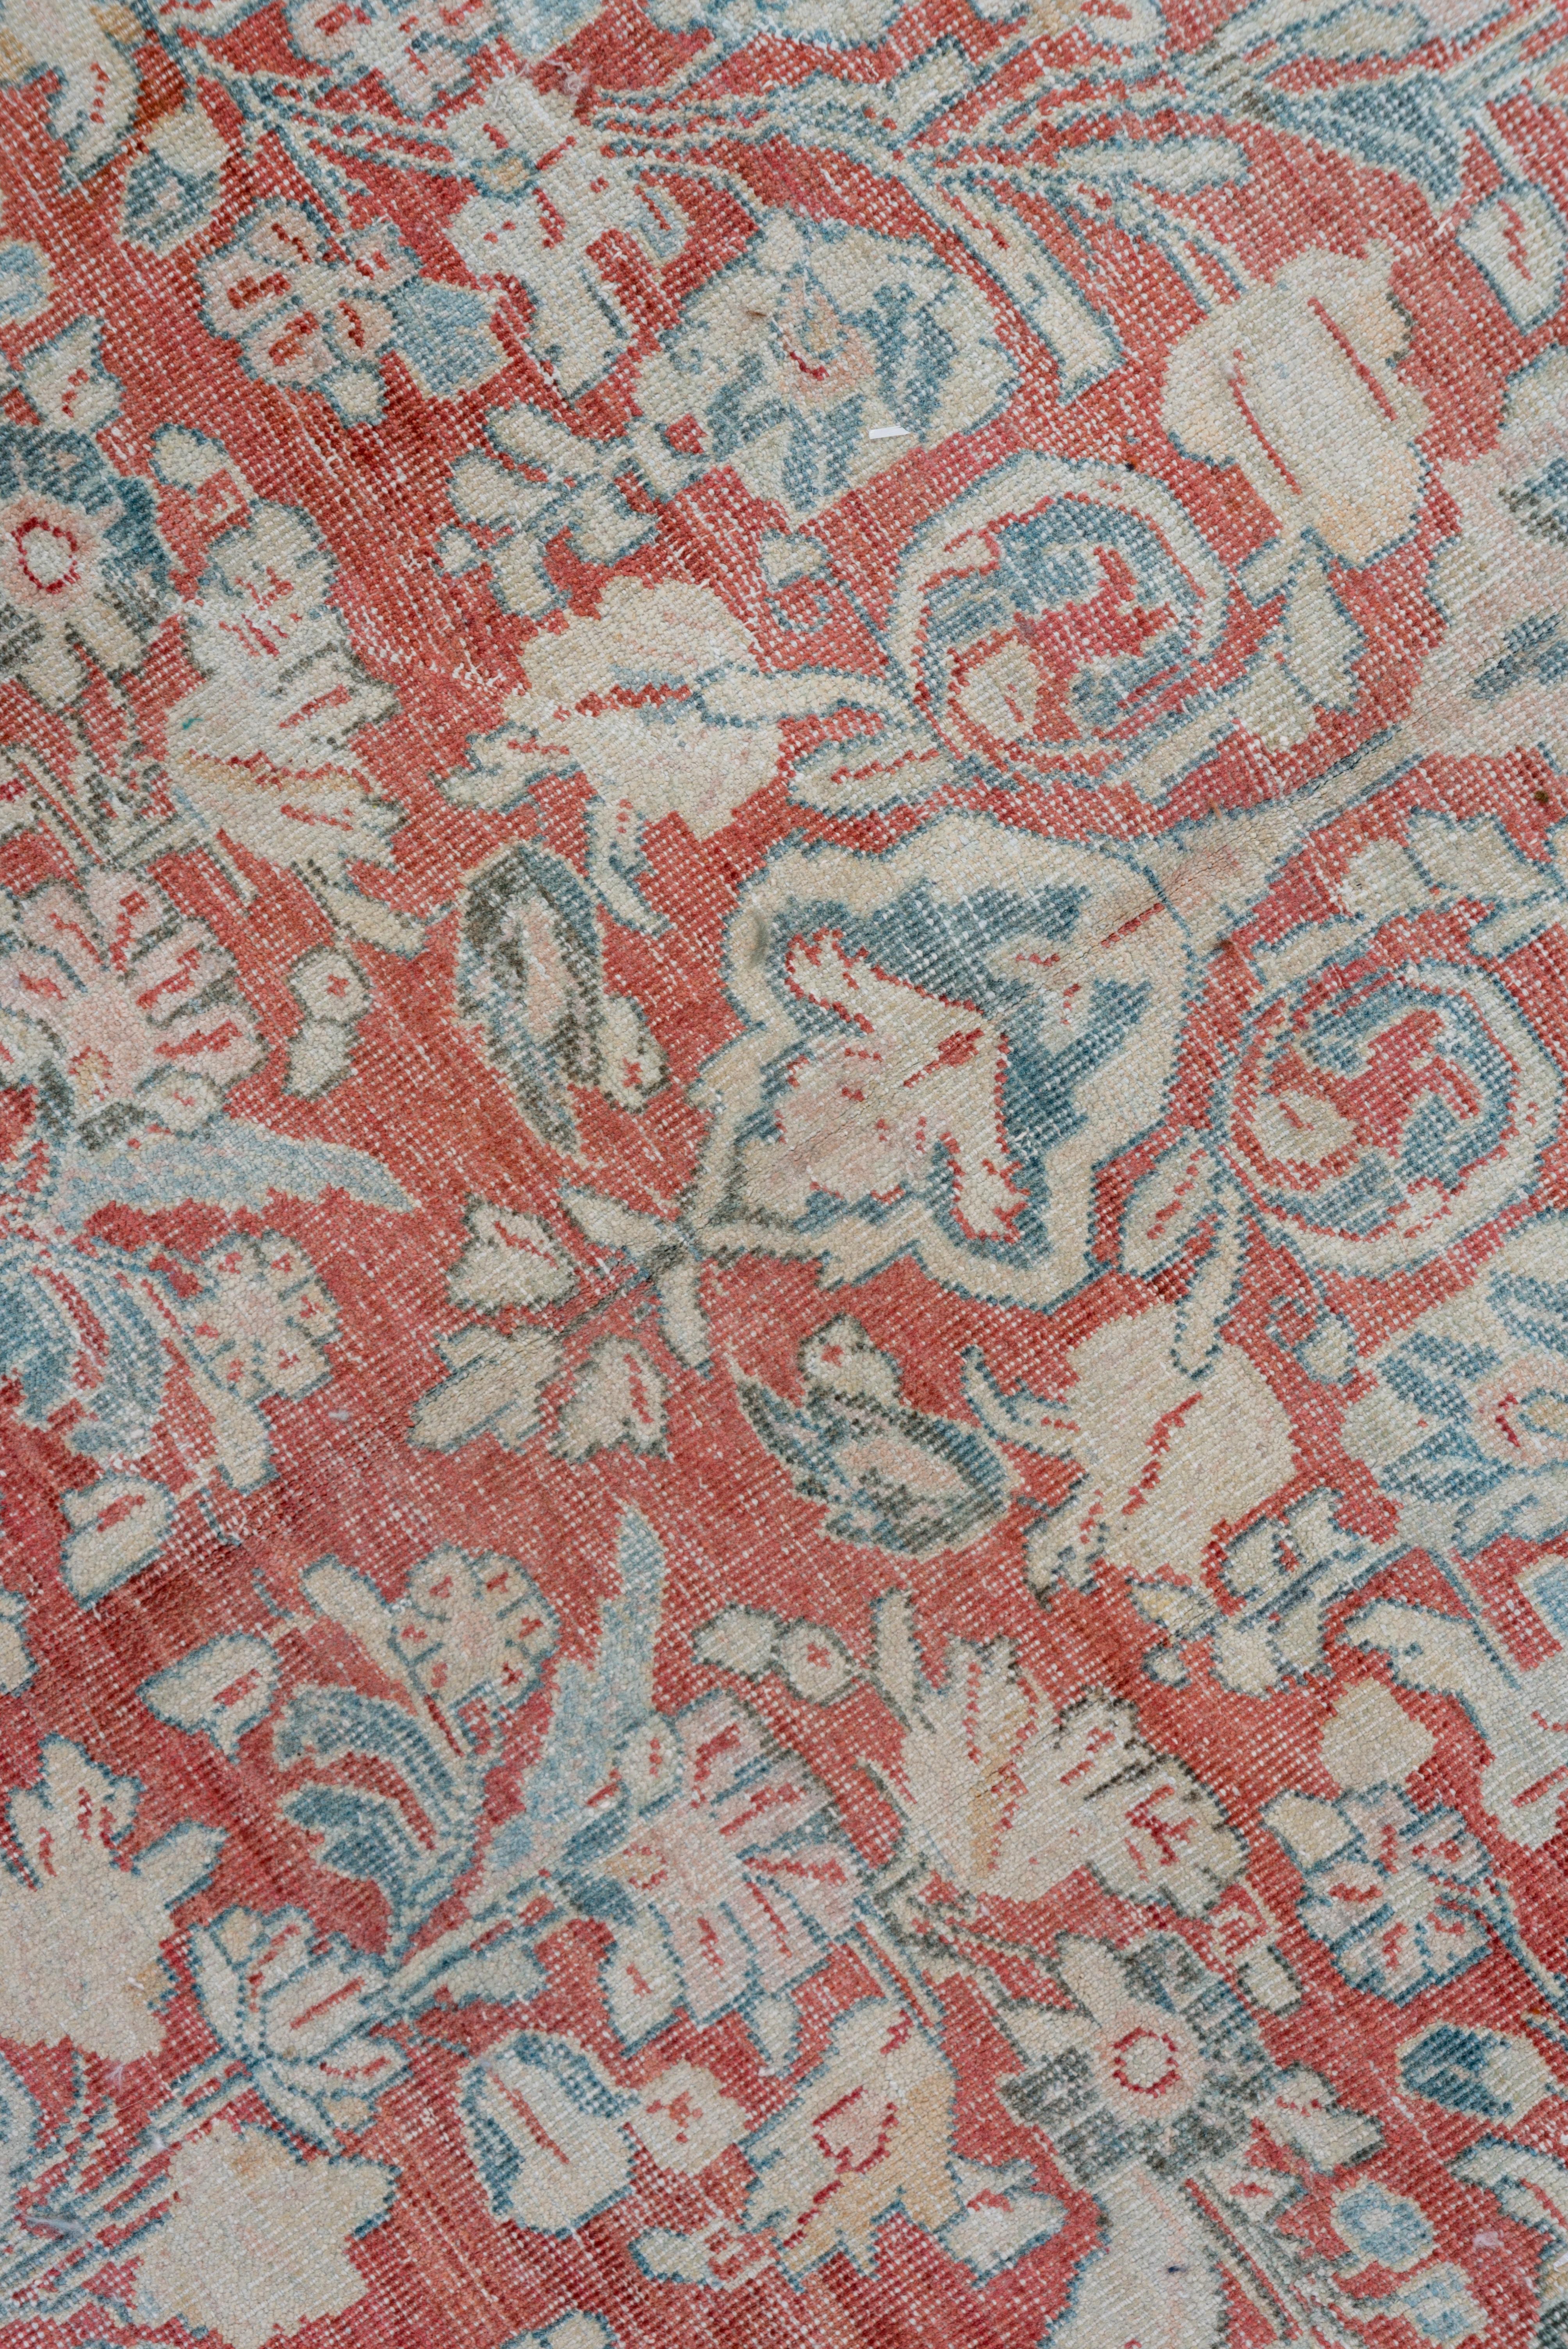 Blue and Red Antique Persian Mahal Carpet In Good Condition For Sale In New York, NY